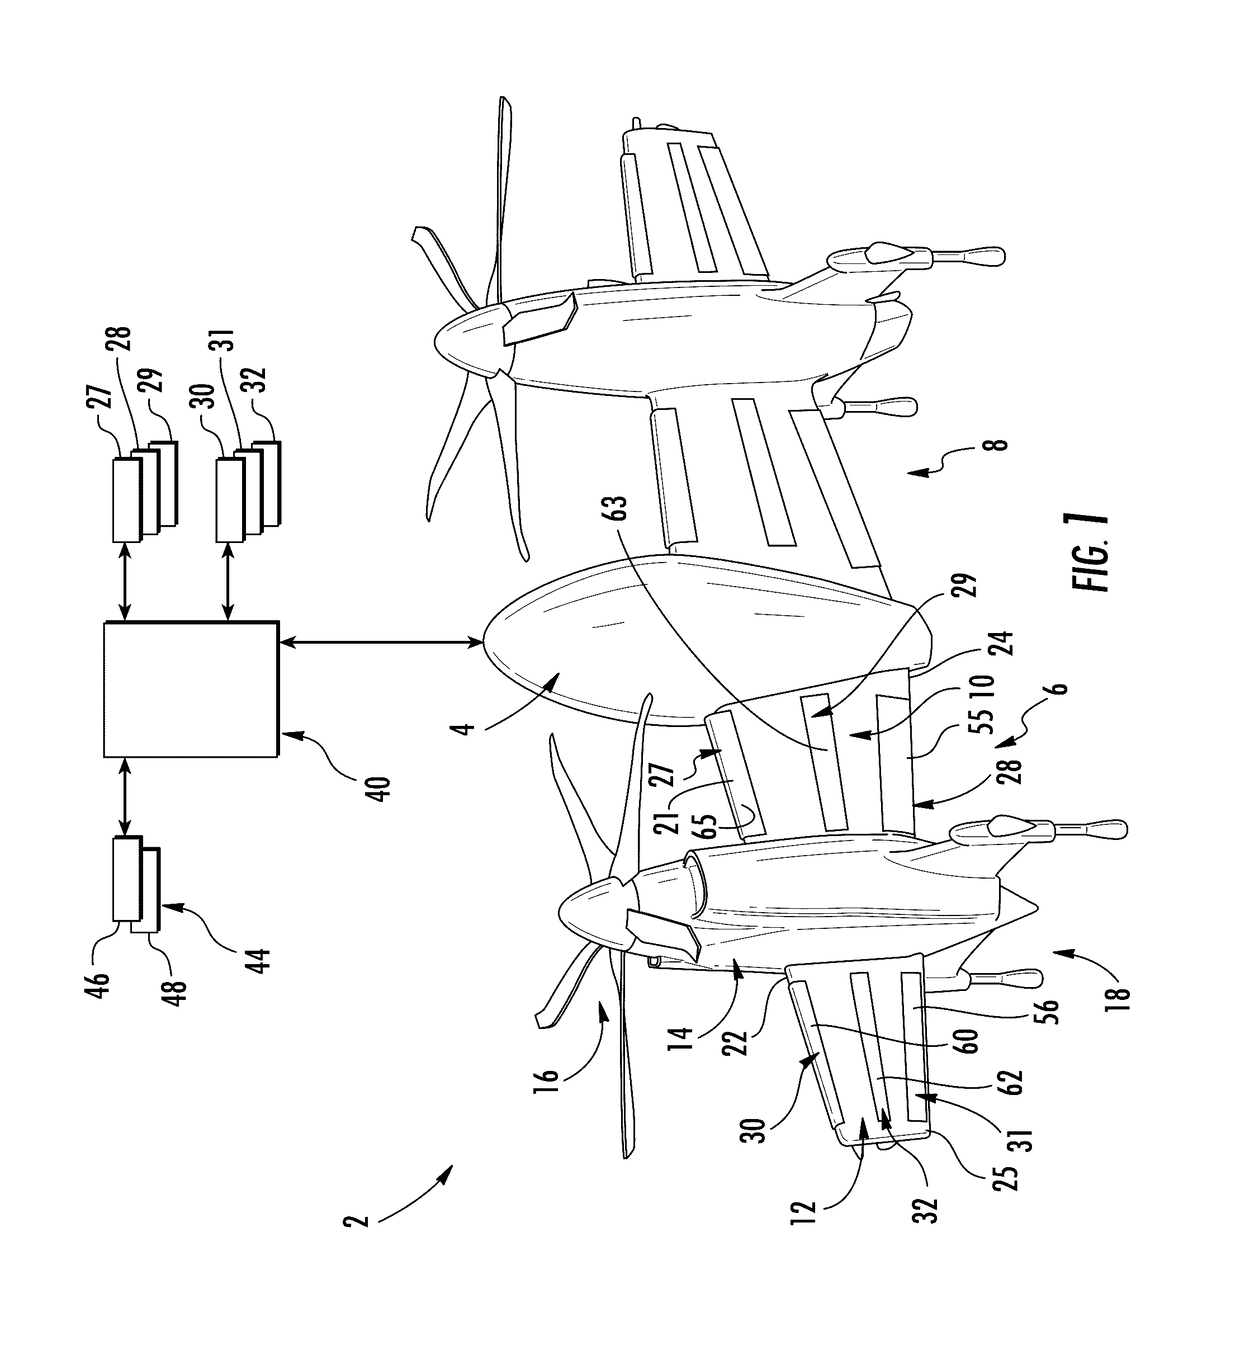 Rotor blown wing aircraft including a rotor blown wing having at least one selectively controllable control surface and a method of controlling a rotor blown wing aircraft